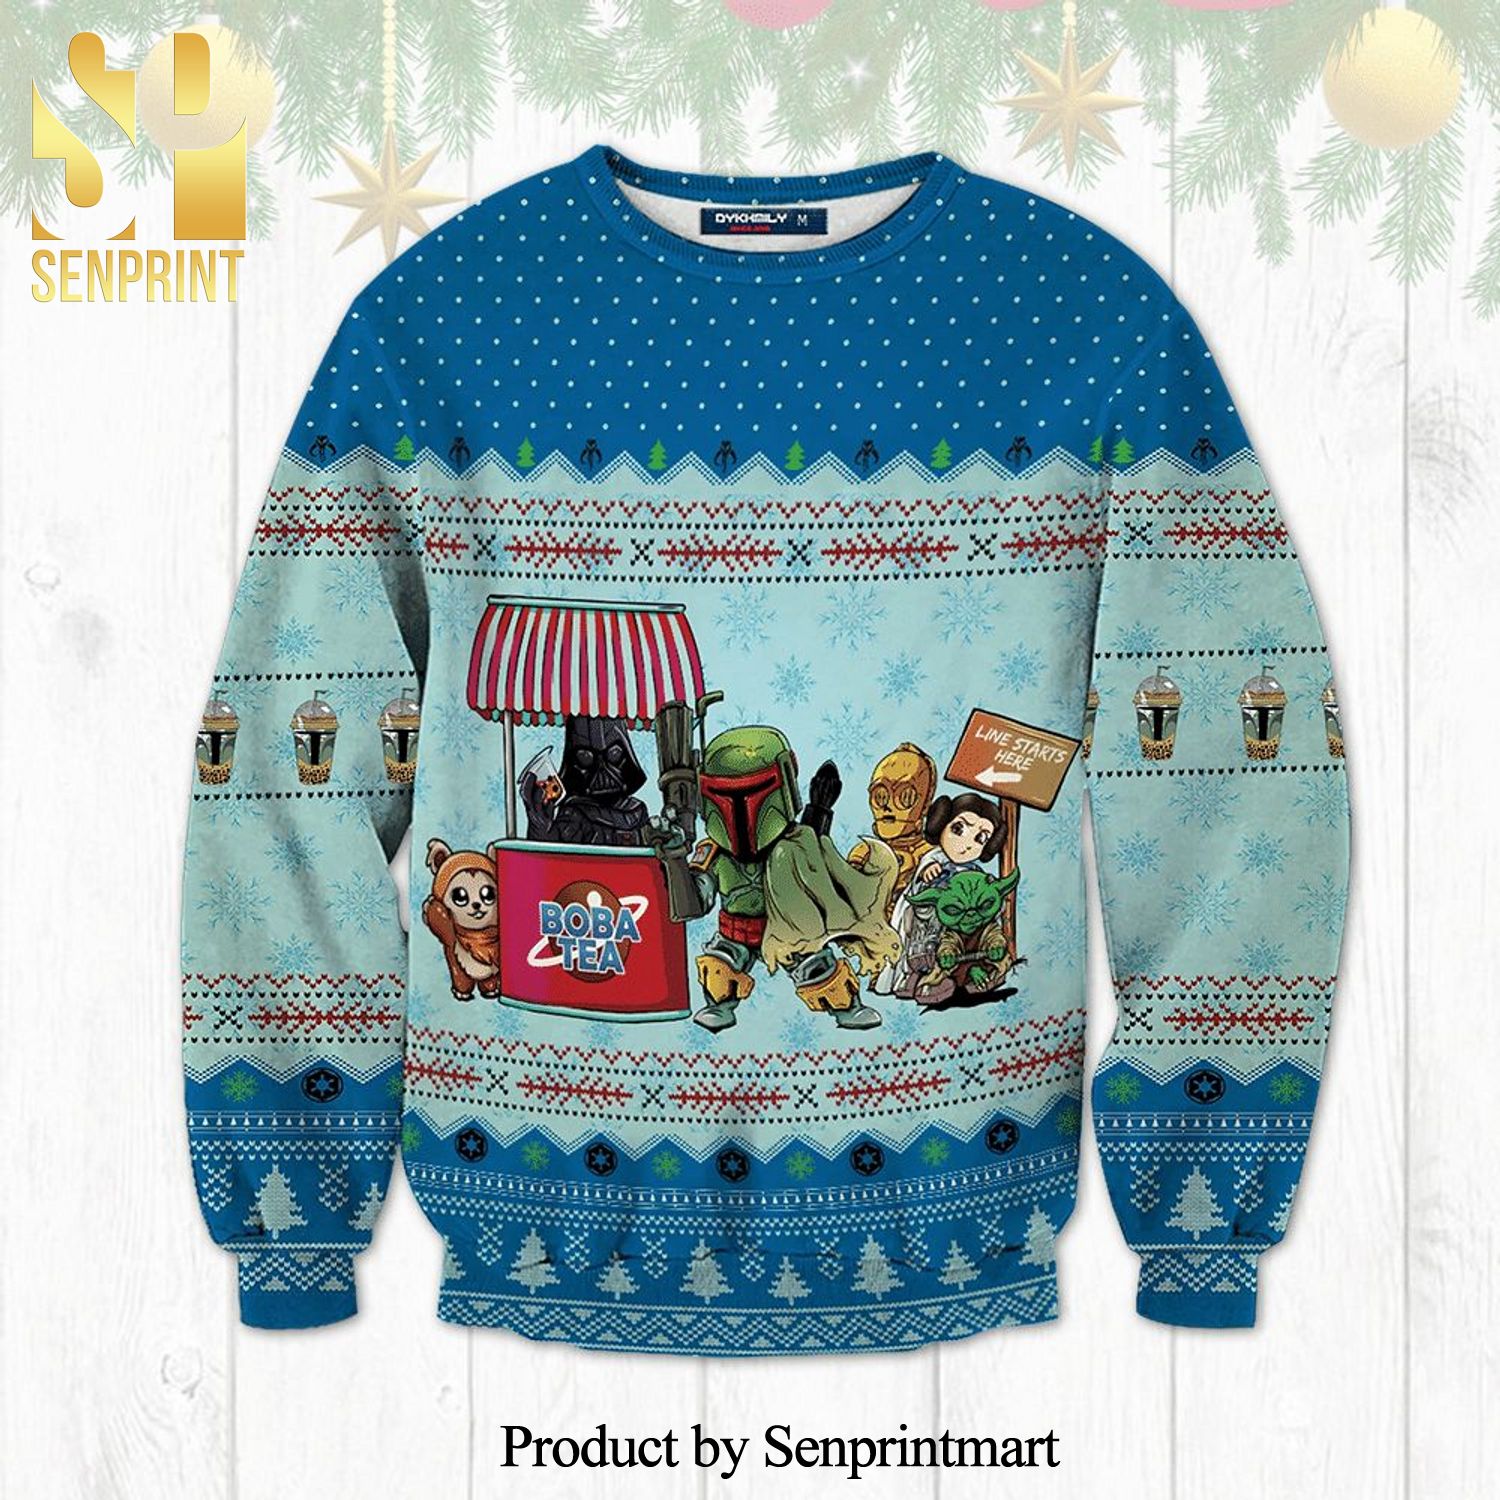 Boba Fett Boba Tea Star Wars Characters Knitted Ugly Christmas Sweater